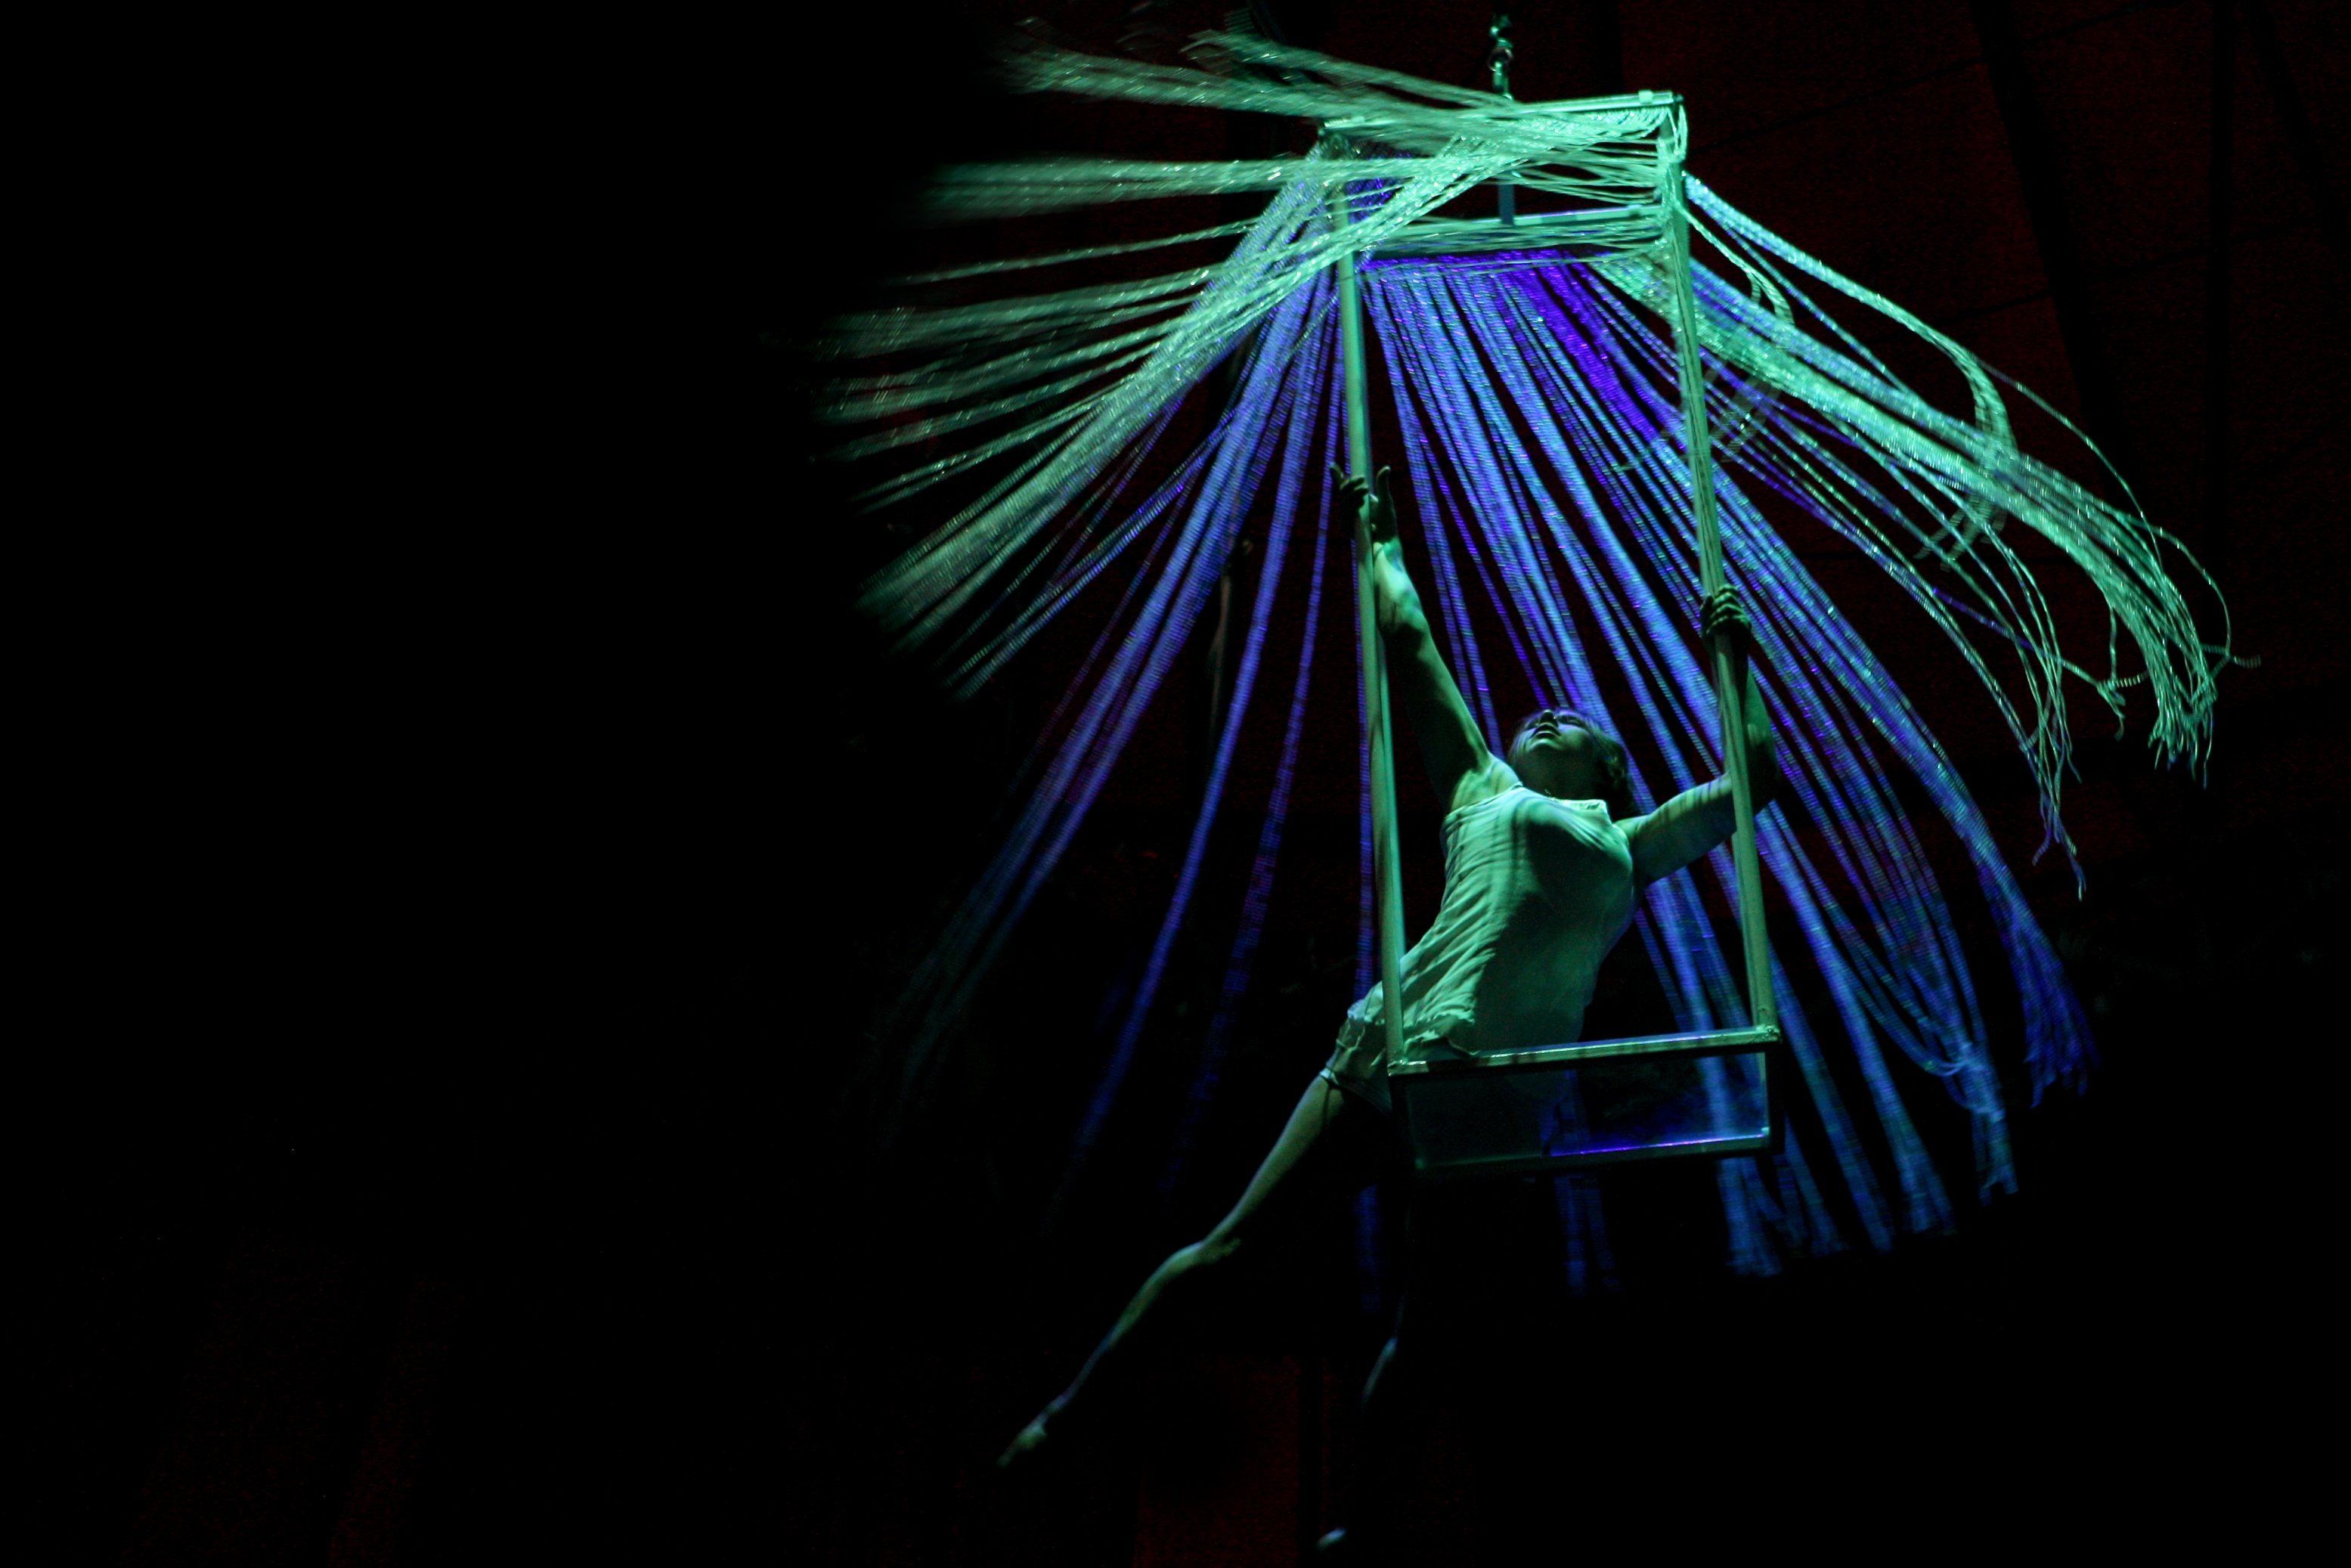 Bianco UK contemporary circus company NoFit State Circus promises to bring an entirely new experience to the average circus goers. Created by artistic director Firenza Guidi, the show blends the light, airy feel of a promenade-style production with the mesmerizing aerial acrobatic stunts from traditional circuses, all backed by a music from a live band. February 17-21, 8pm; February 20, 2.30pm, Queen Elizabeth Stadium, 18 Oi Kwan Rd, Wan Chai, HK$380 Urbtix. Inquiries: 2268 7323 [2015 BOOK NOW]